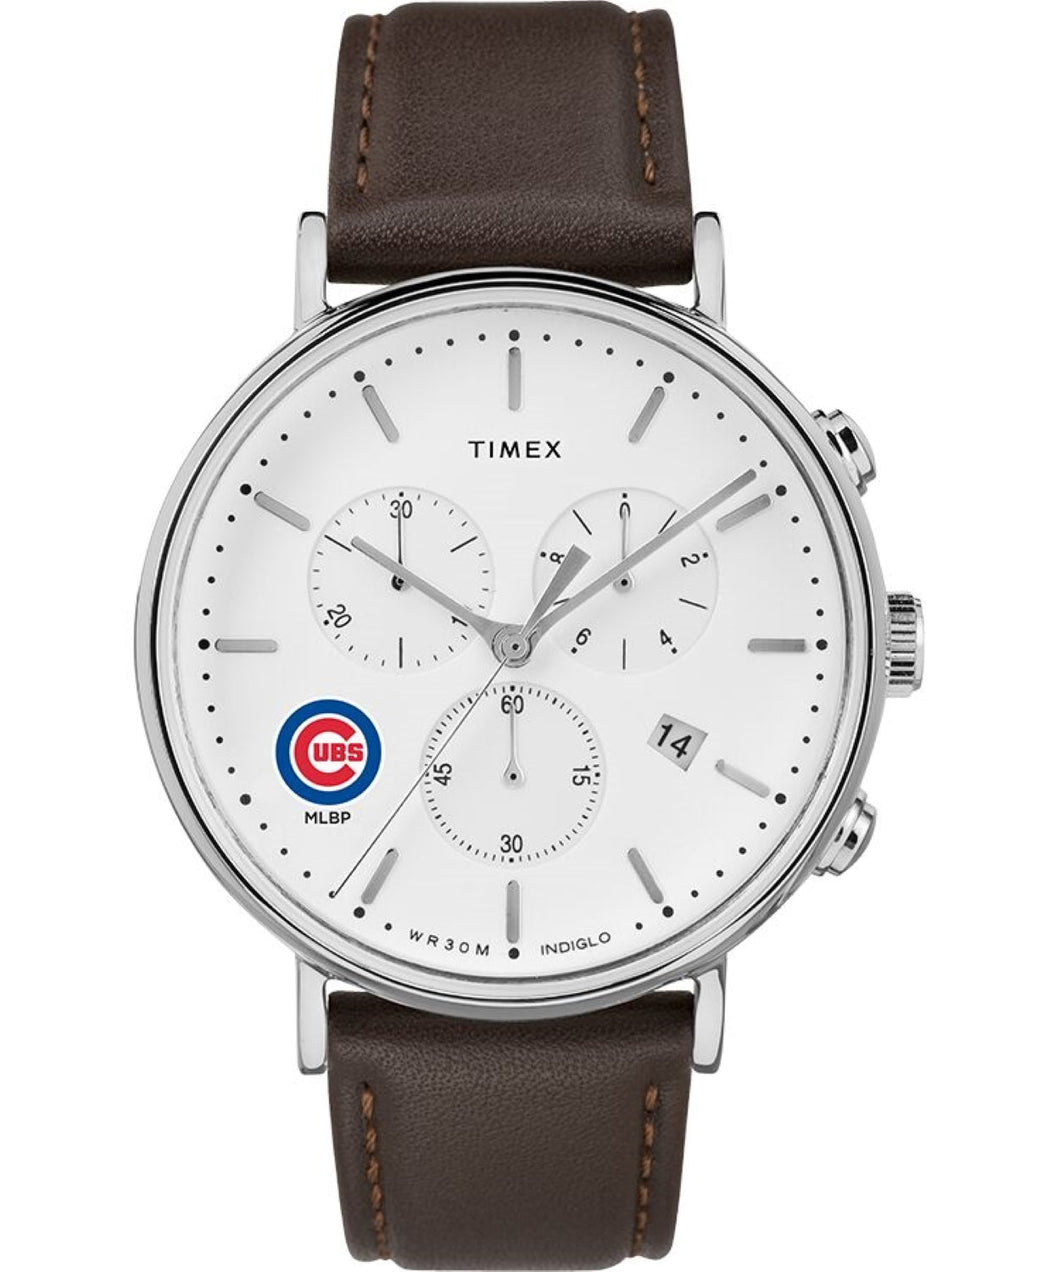 Chicago Cubs General Manager Men's Timex Watch